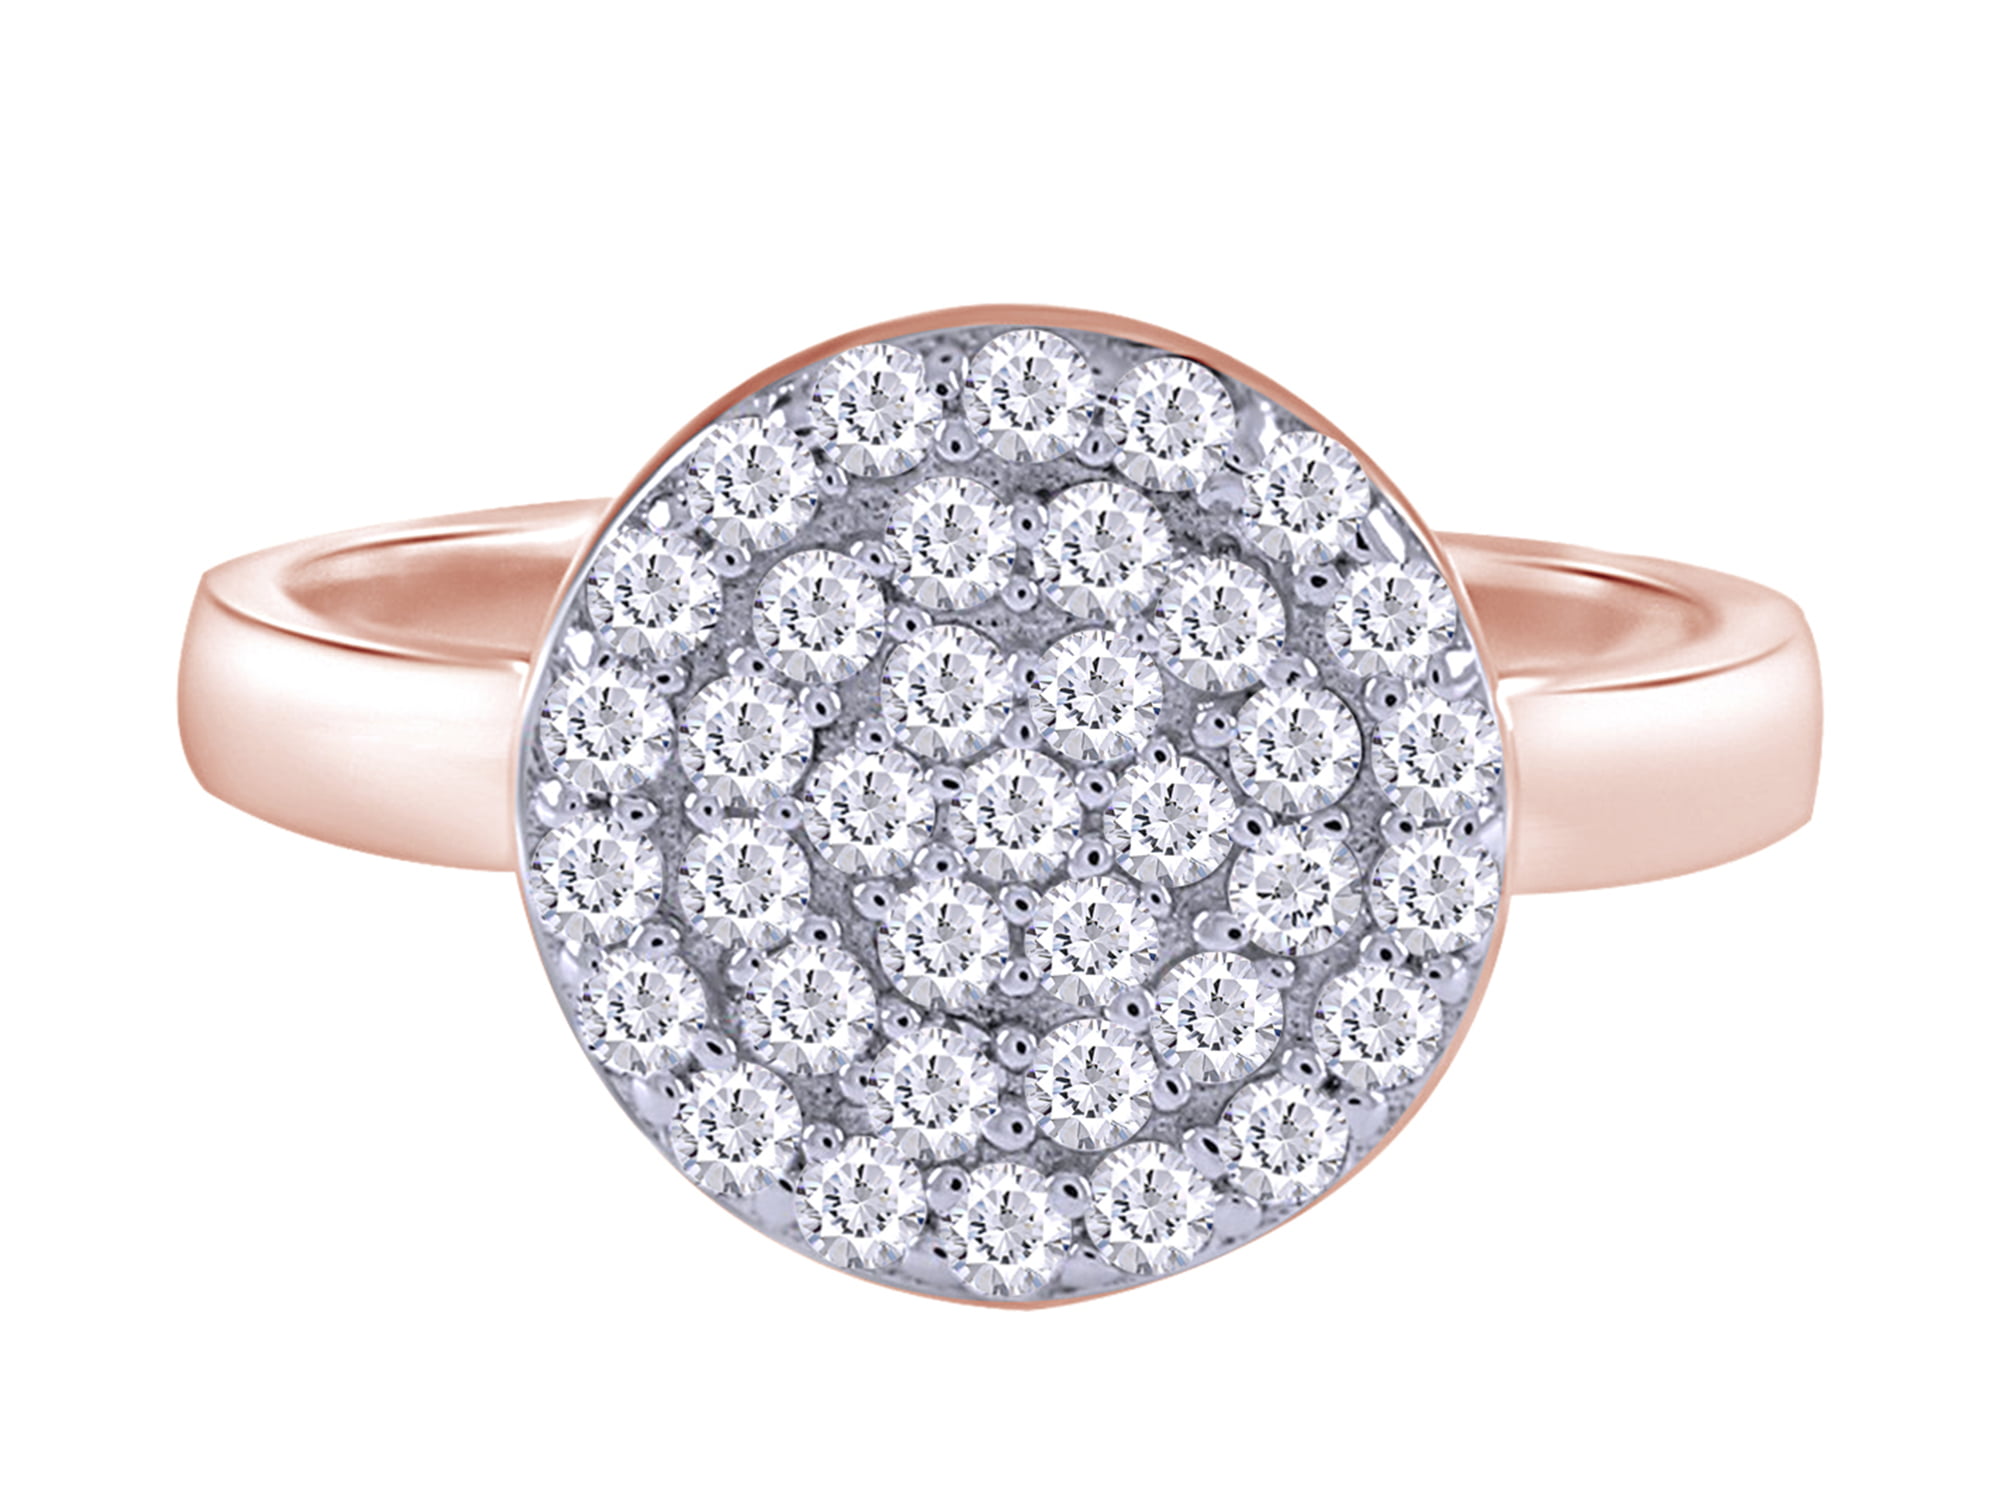 Wishrocks Round Cut White Cubic Zirconia Cluster Ring in 14K White Gold Over Sterling Silver